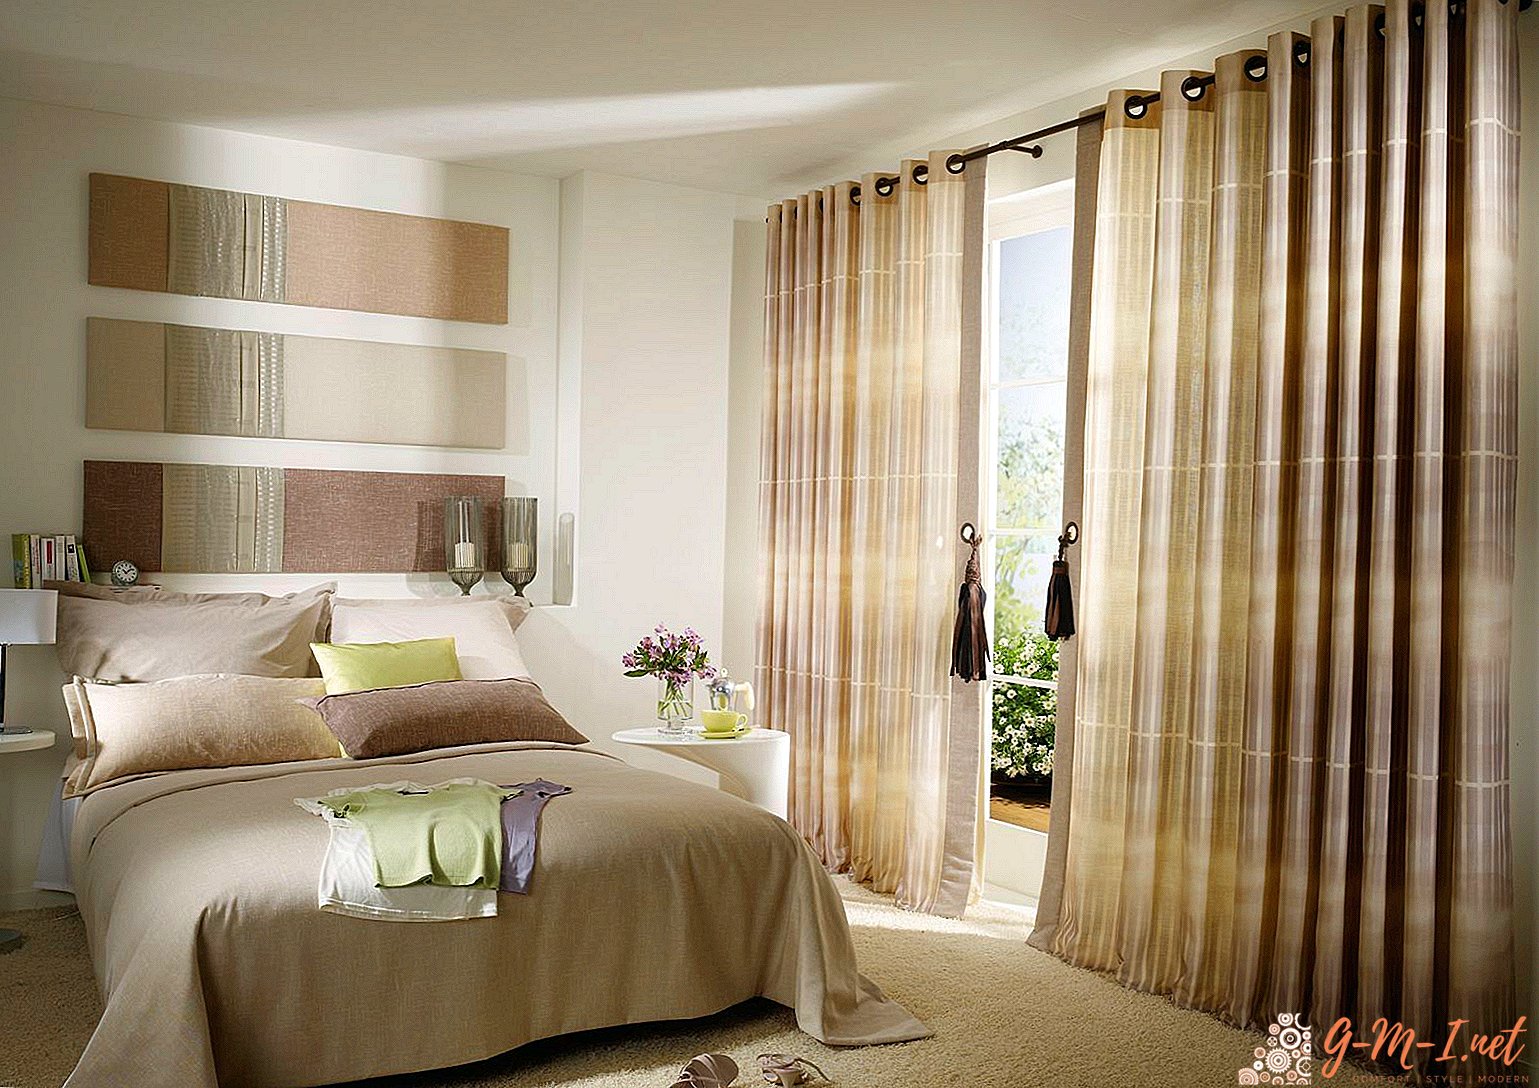 Curtains in a bright bedroom